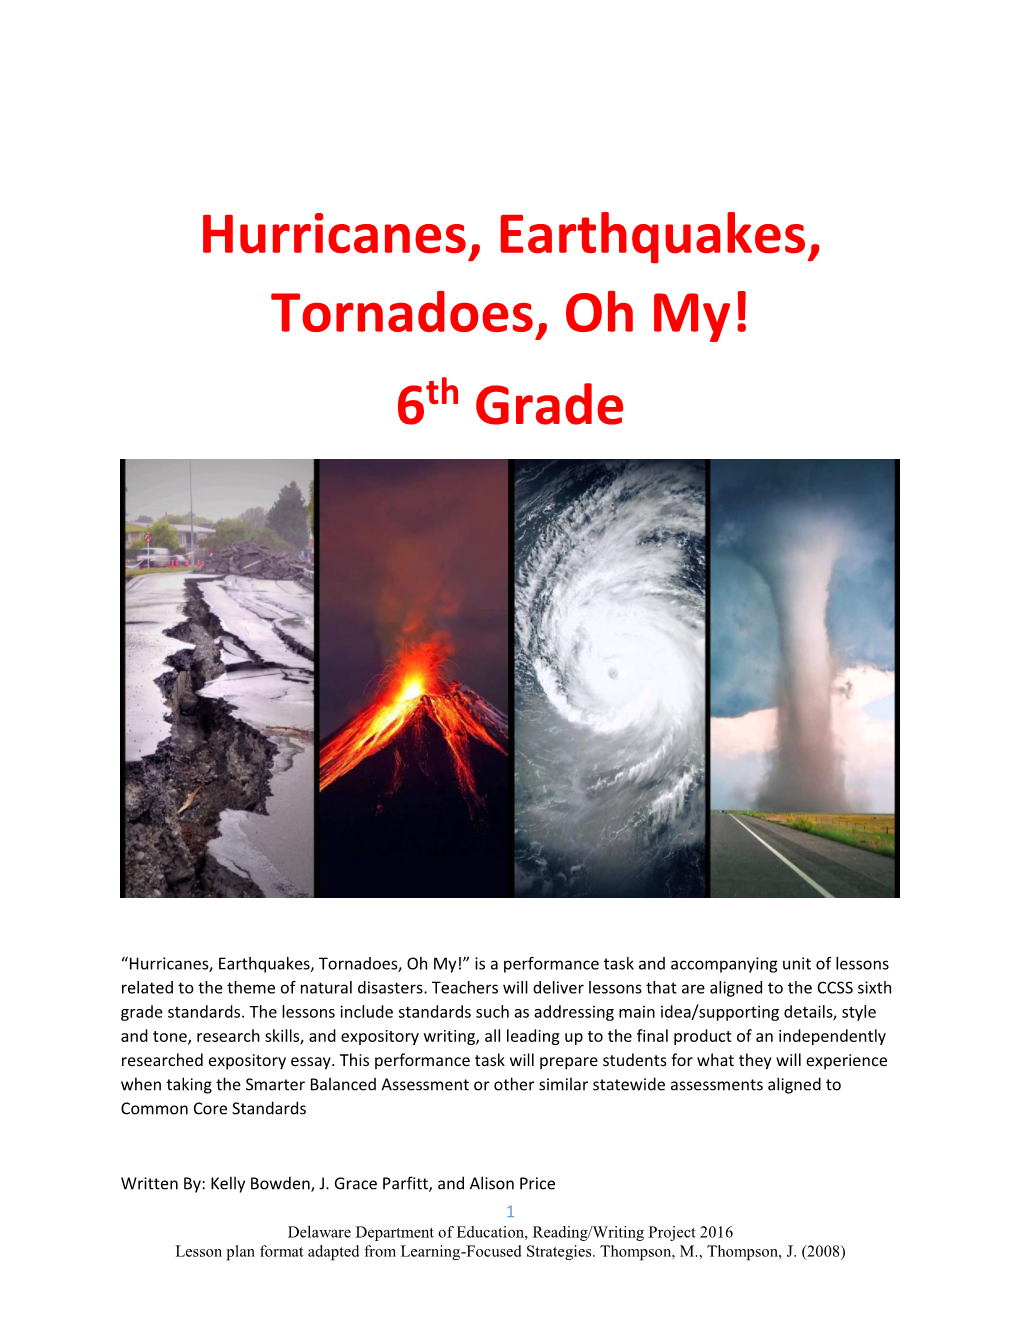 Hurricanes, Earthquakes, Tornadoes, Oh My! 6 Grade